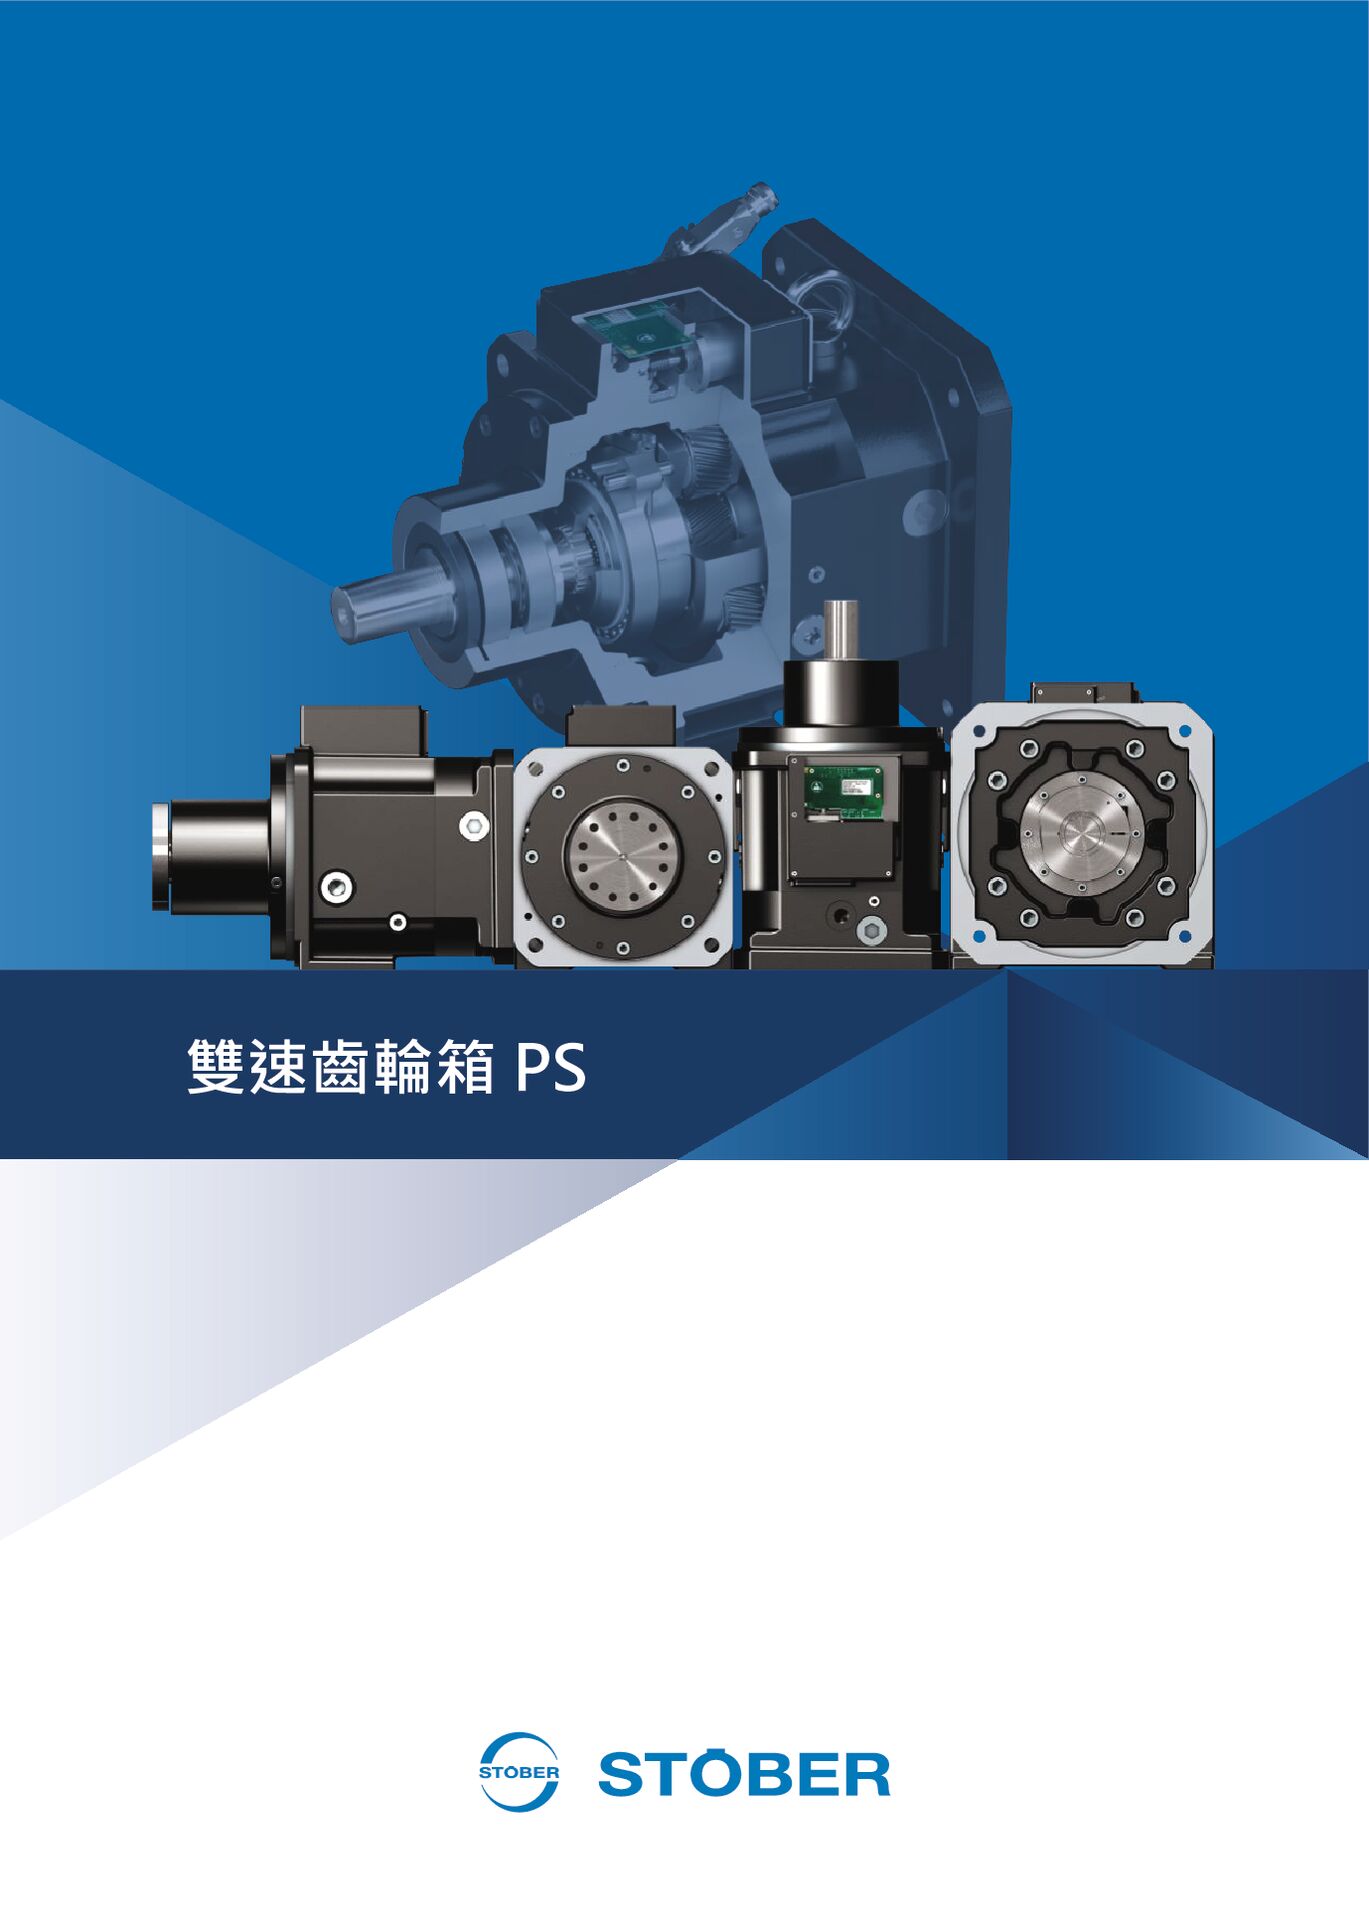 Catalog PS two-speed gearboxes